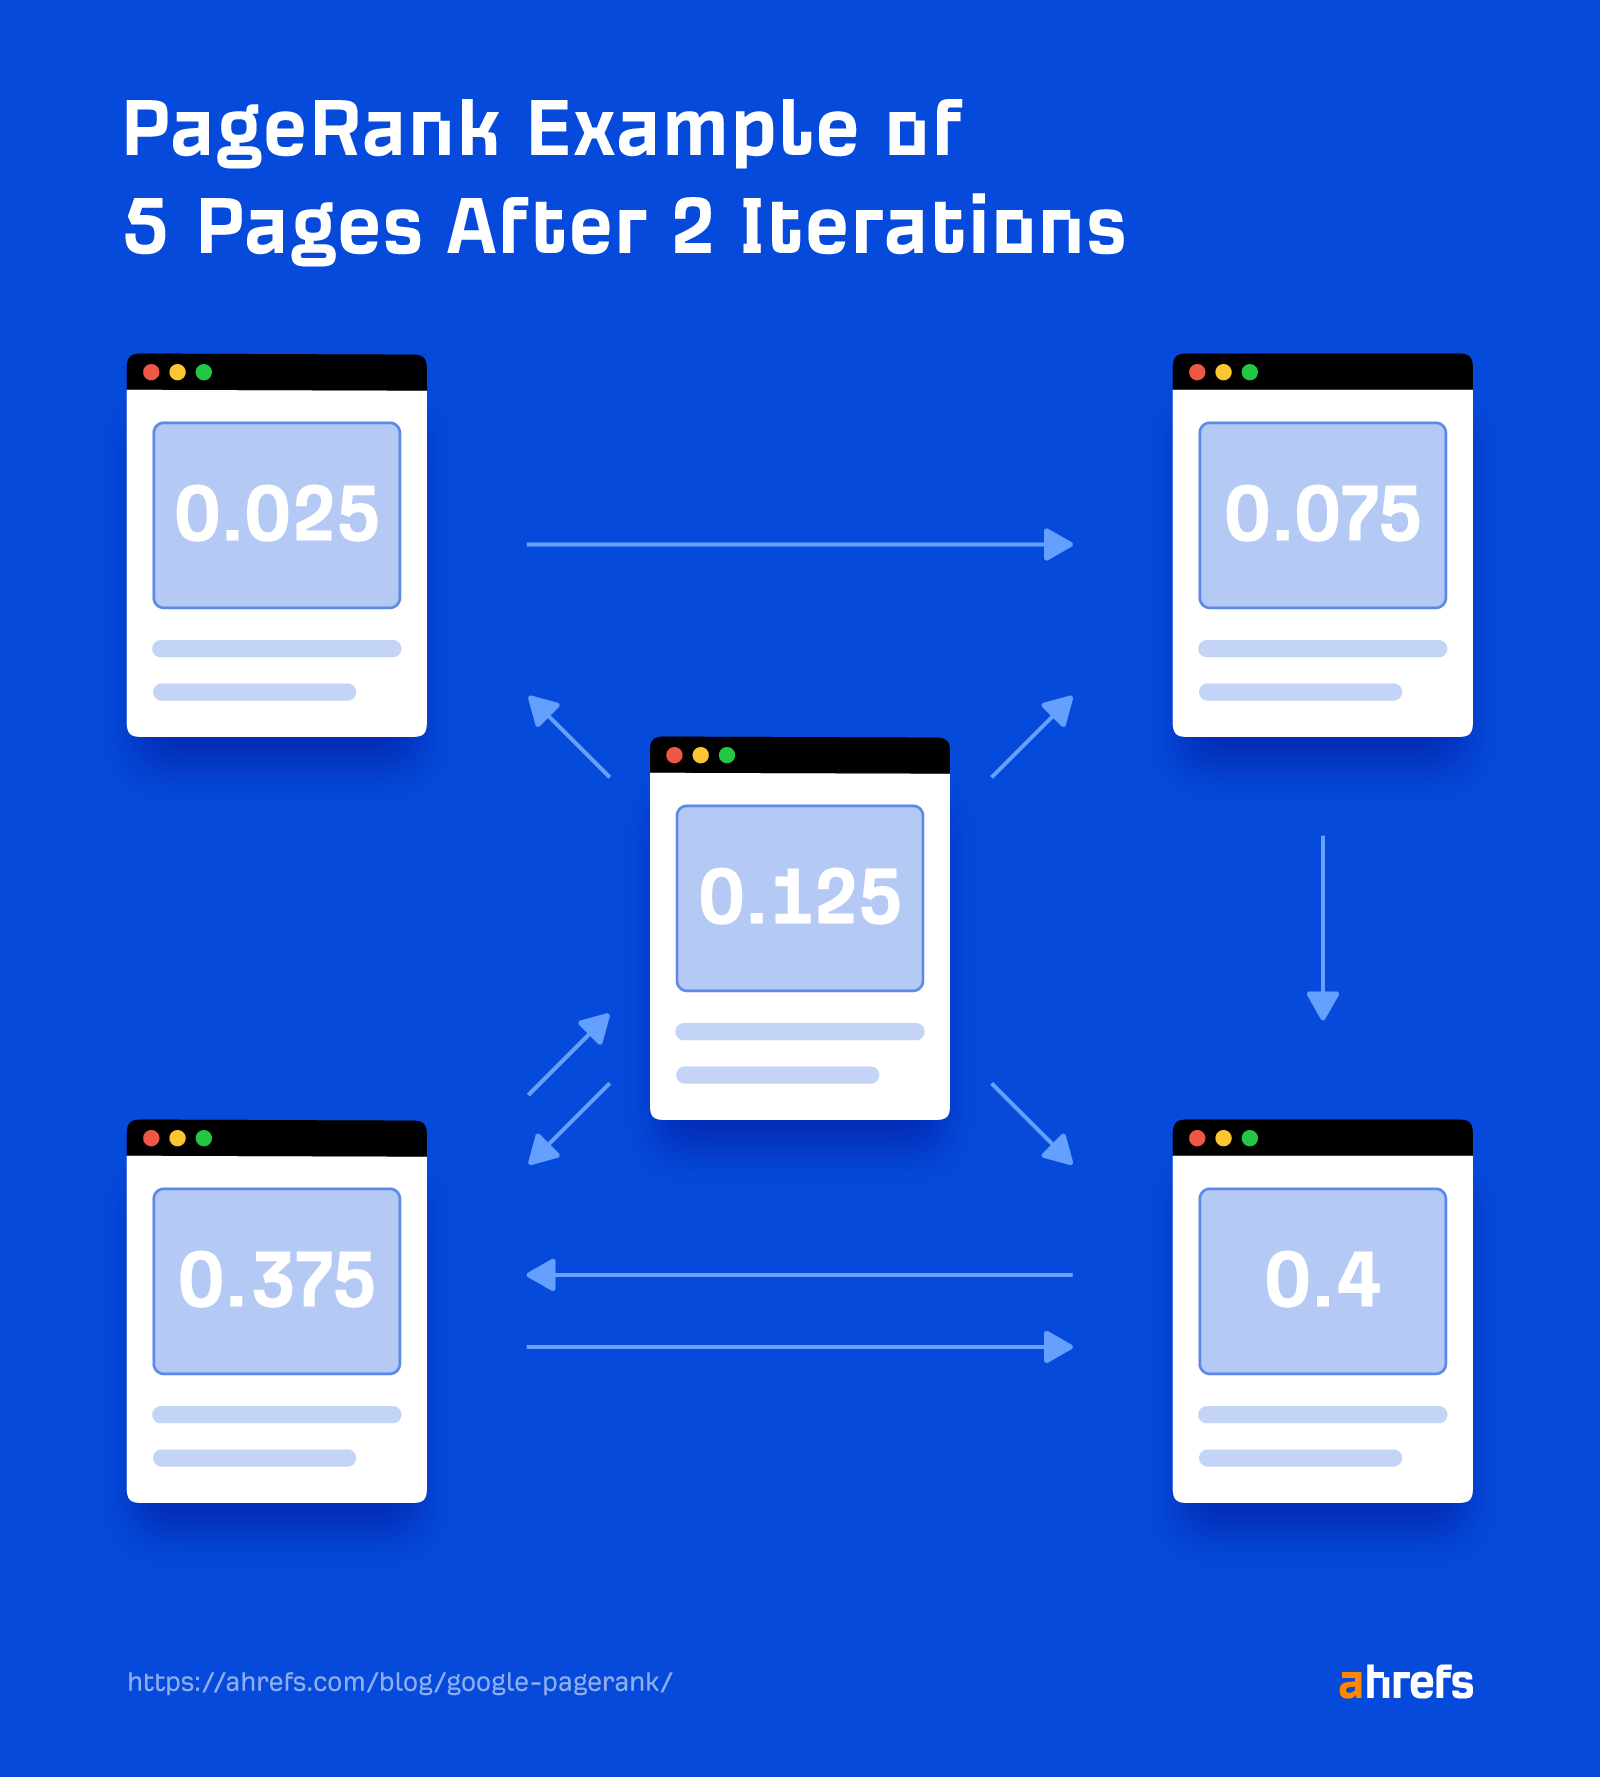 PageRank example of five pages after two iterations